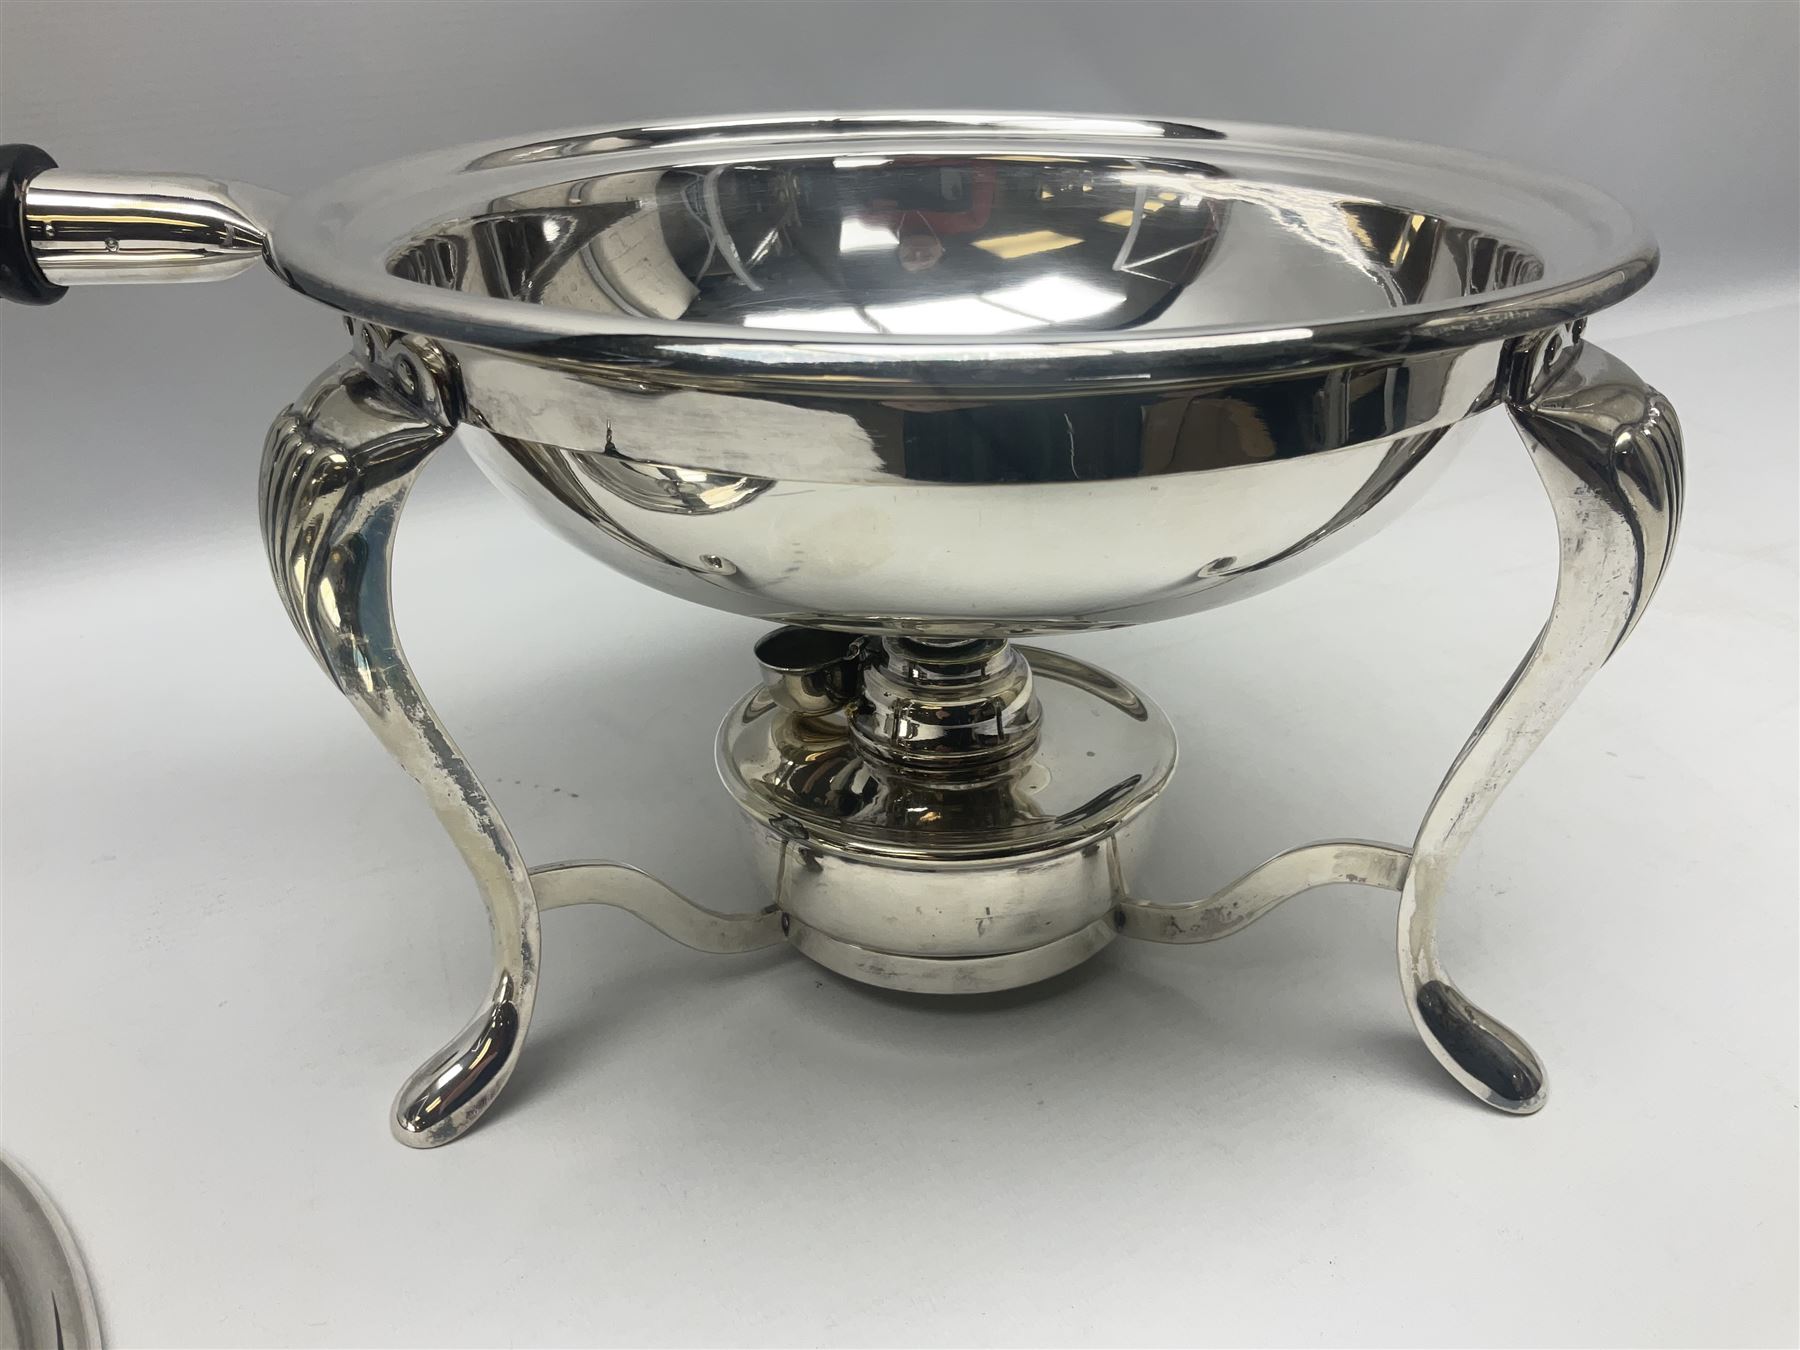 Walker & Hall silver plated long handled chafing dish - Image 12 of 18